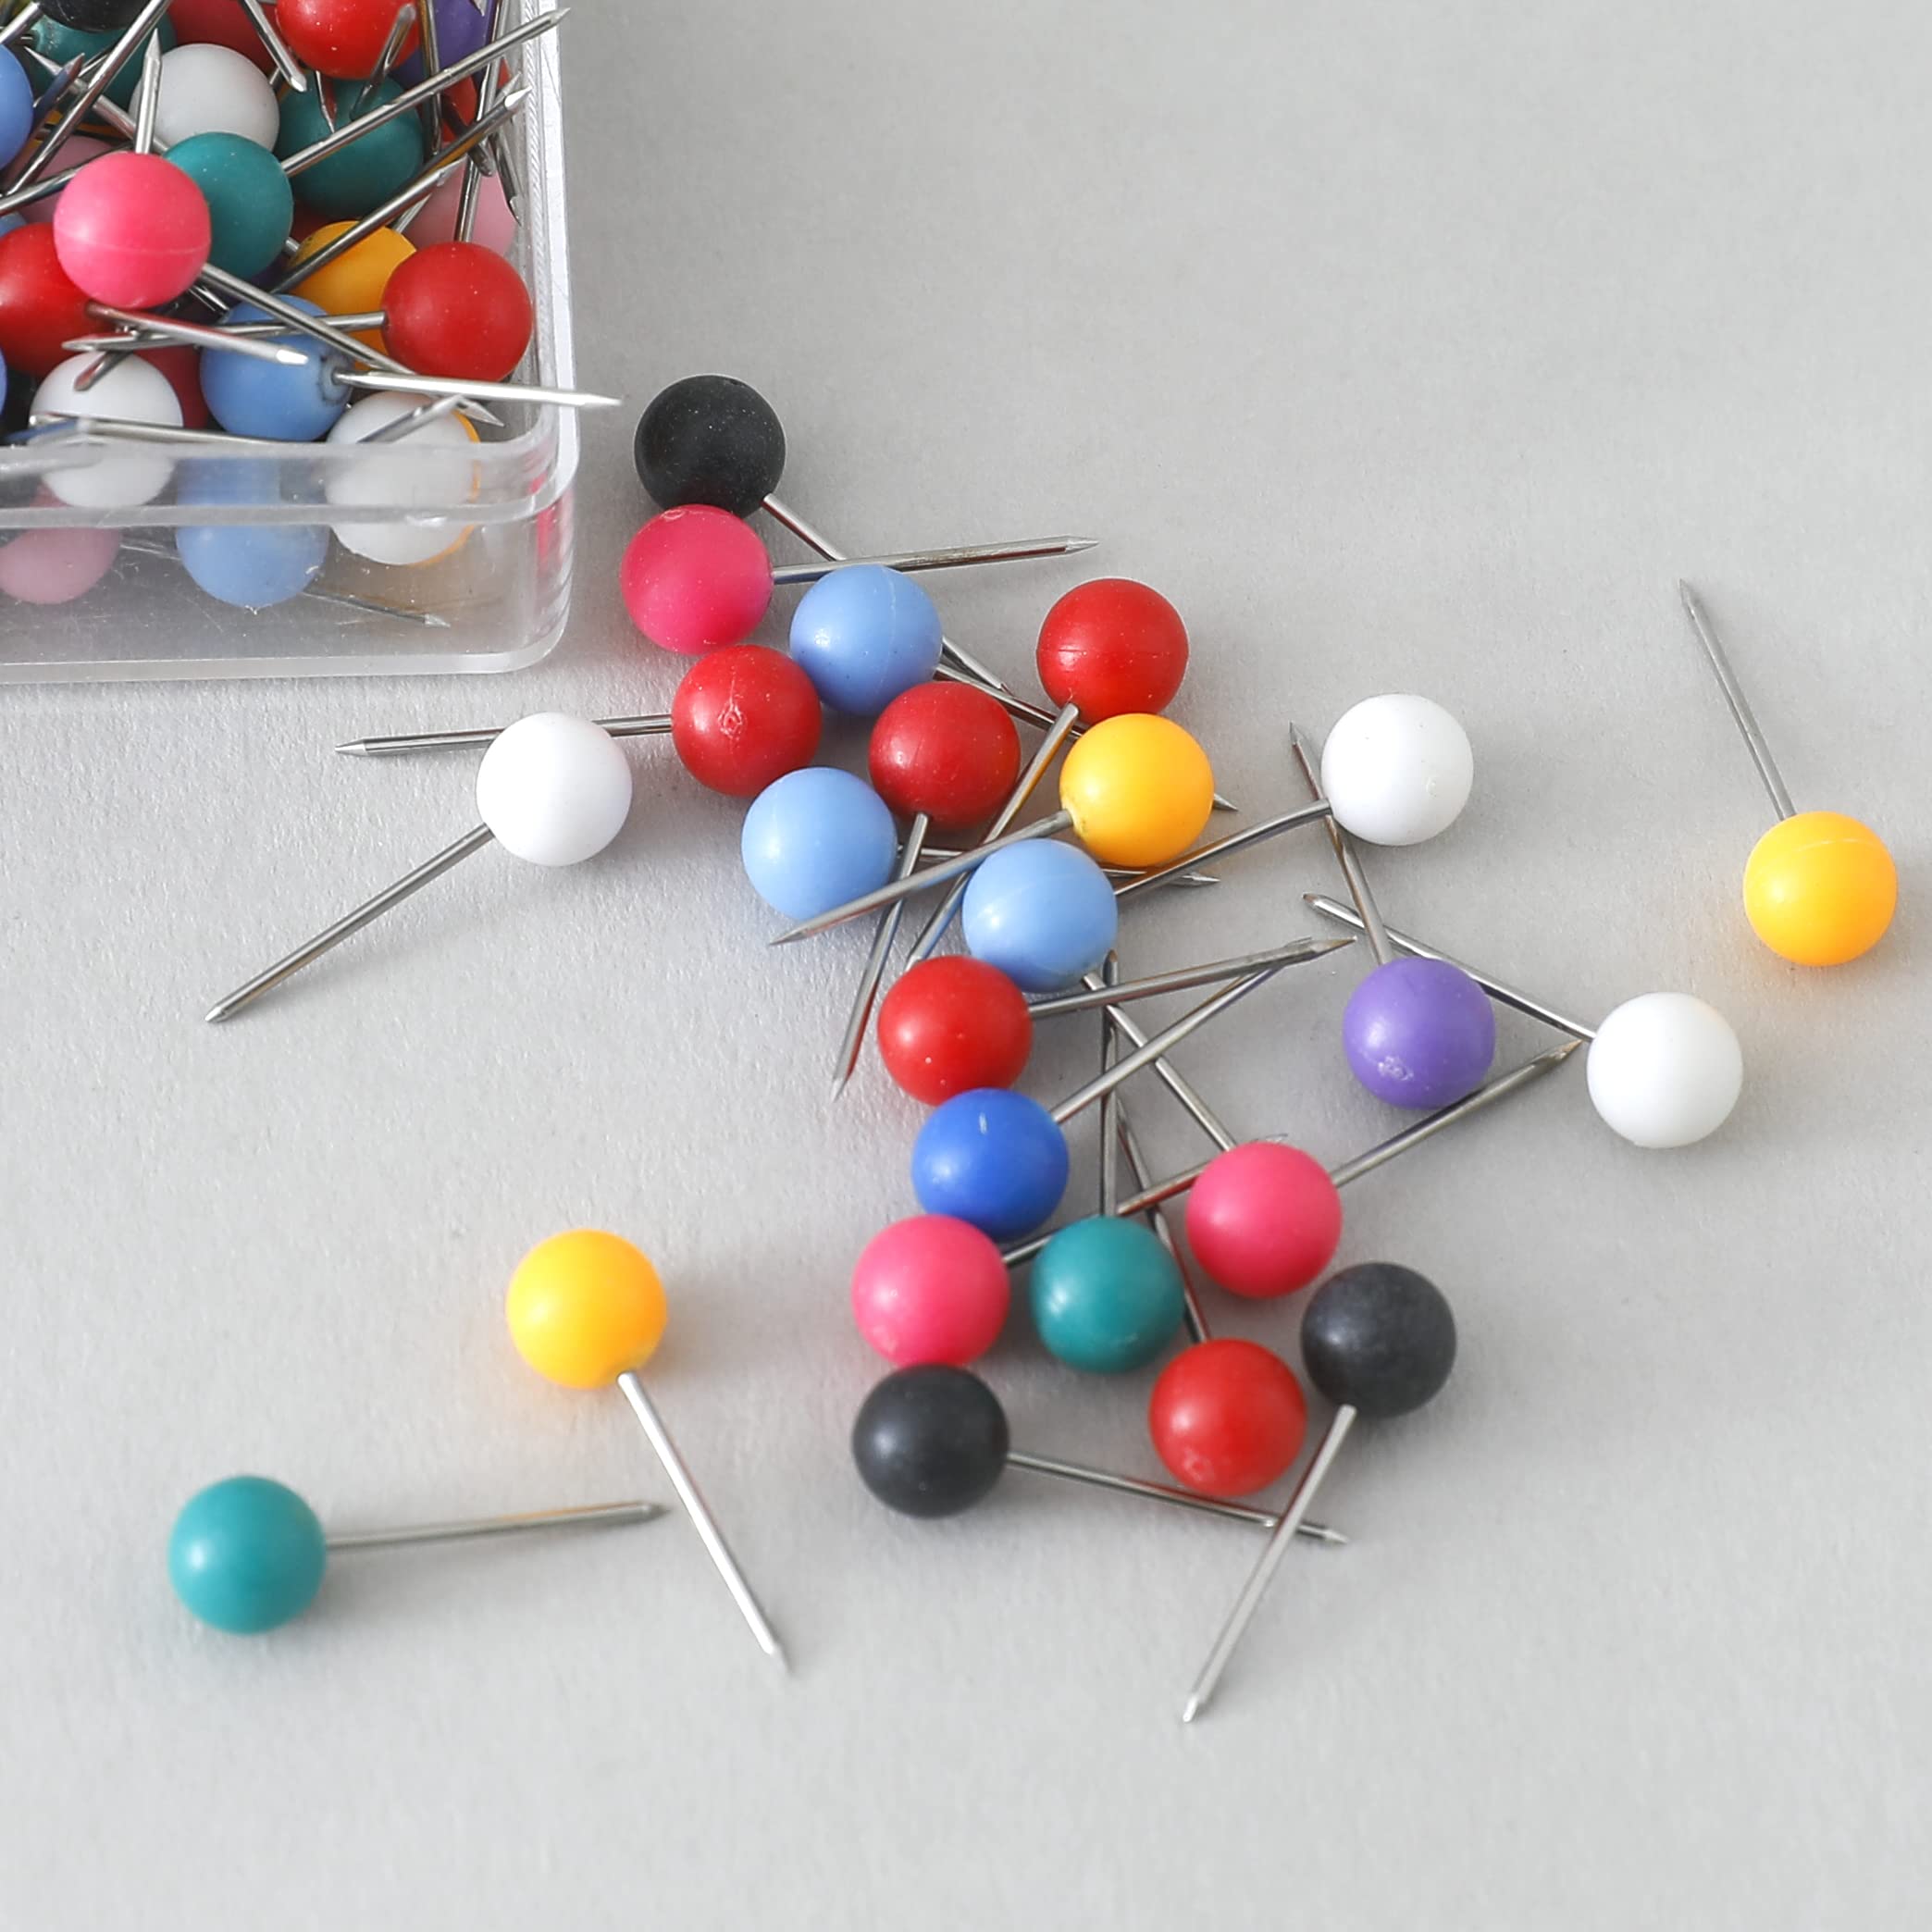 Kuber IndustriesSolid color Push Pins Tacks|Heavy-Duty Notice Board Pins|"100" (Multi)